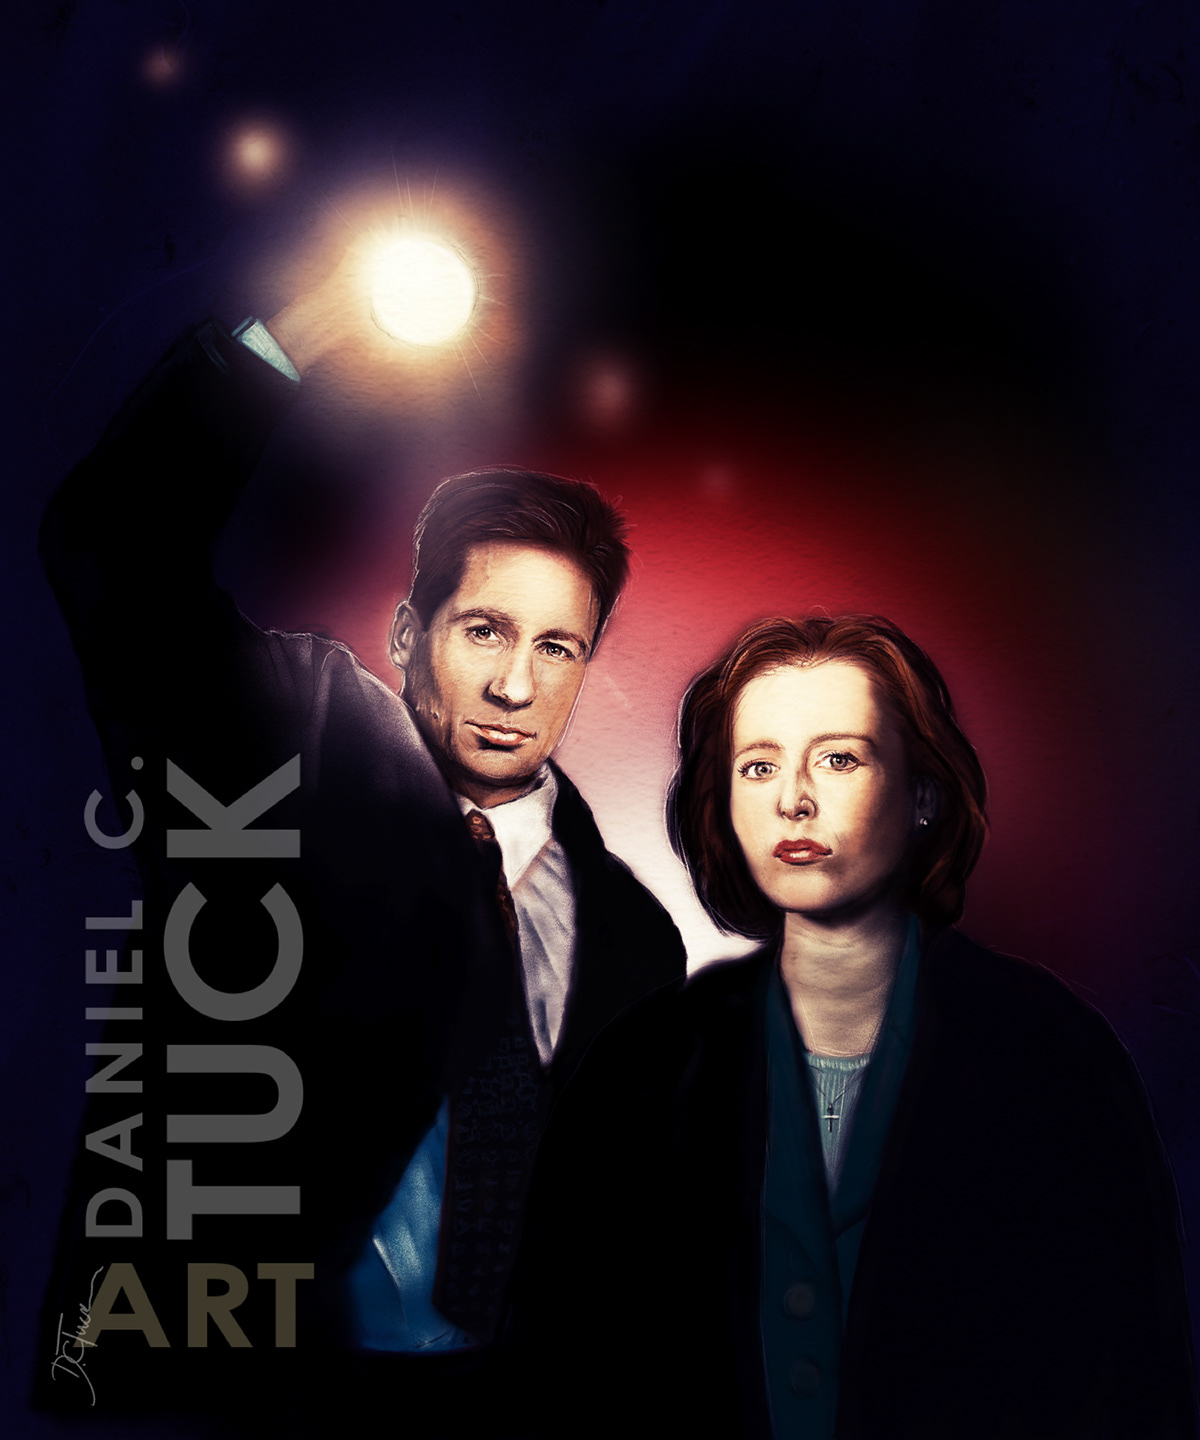 x-files mulder scully david duchovny Gillian anderson chris carter UFO mystery conspiracy tv Fan Art